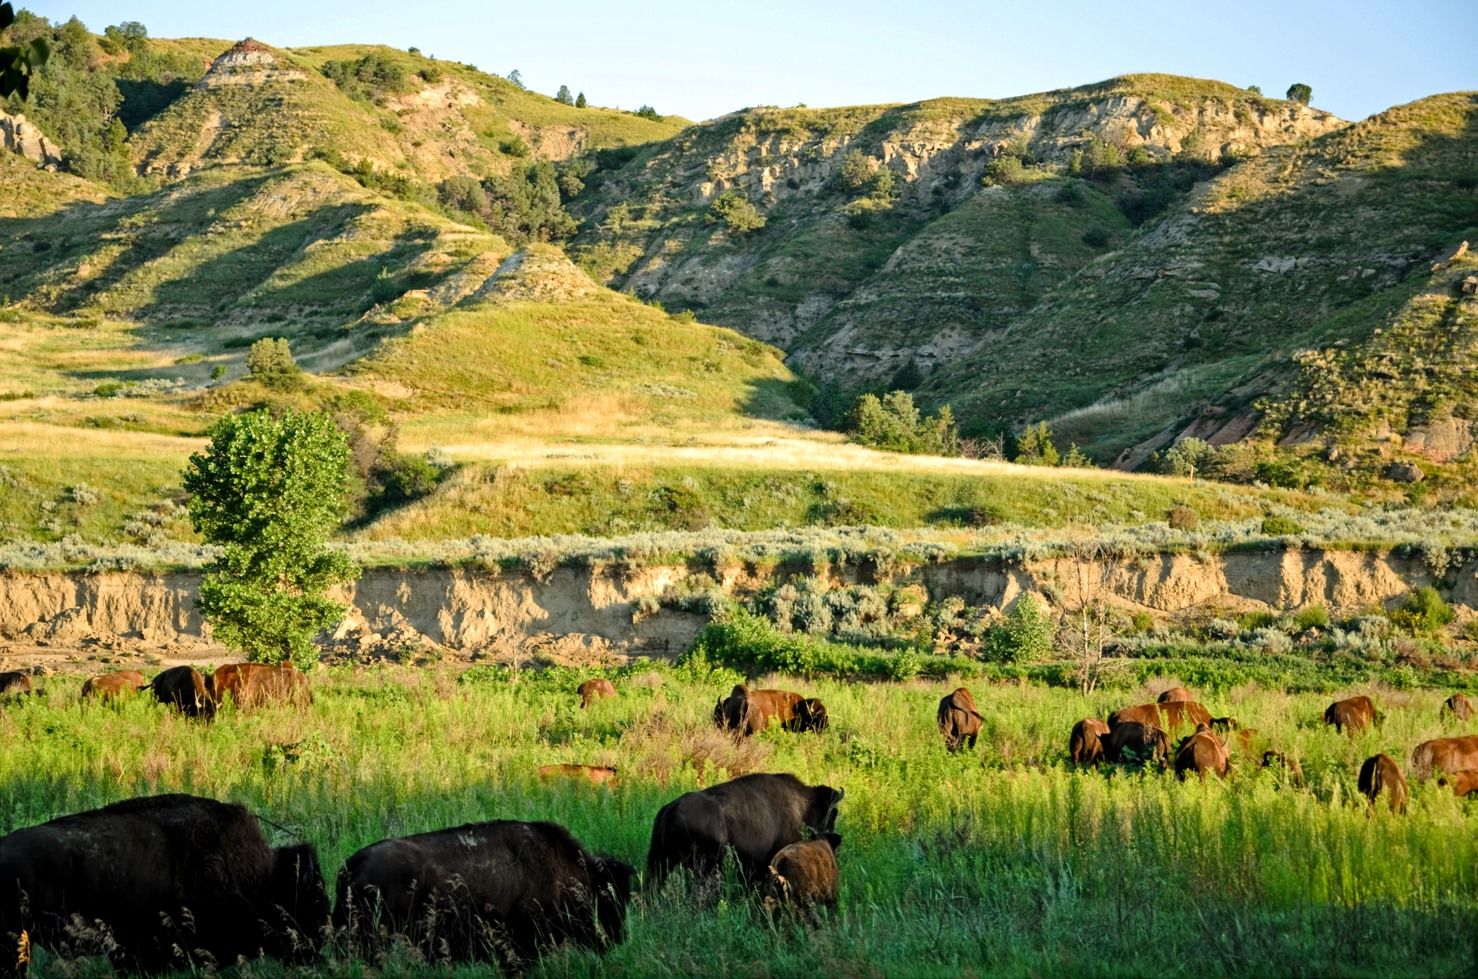 Theodore Roosevelt National Park Is A United States